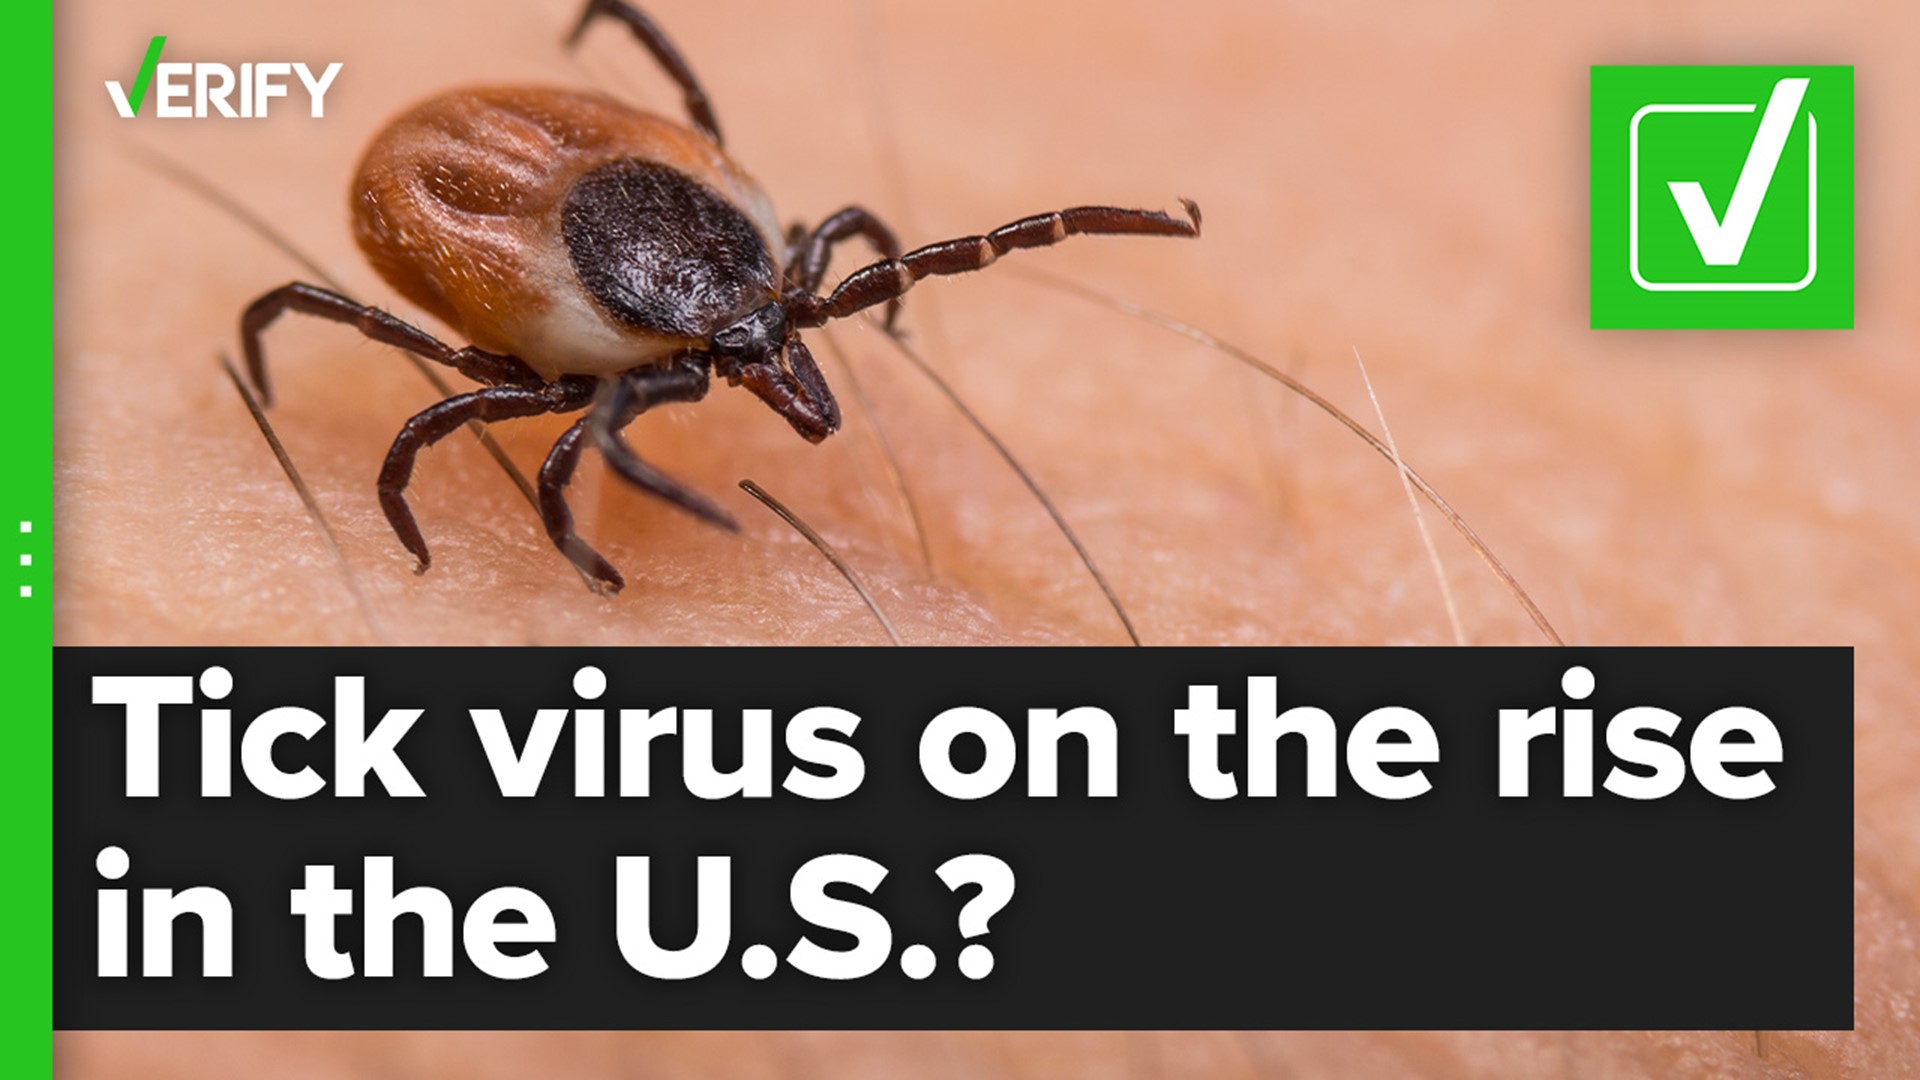 Powassan virus is usually spread through the bite of an infected black-legged or deer tick. The rare tick-borne illness can sometimes cause severe disease or death.